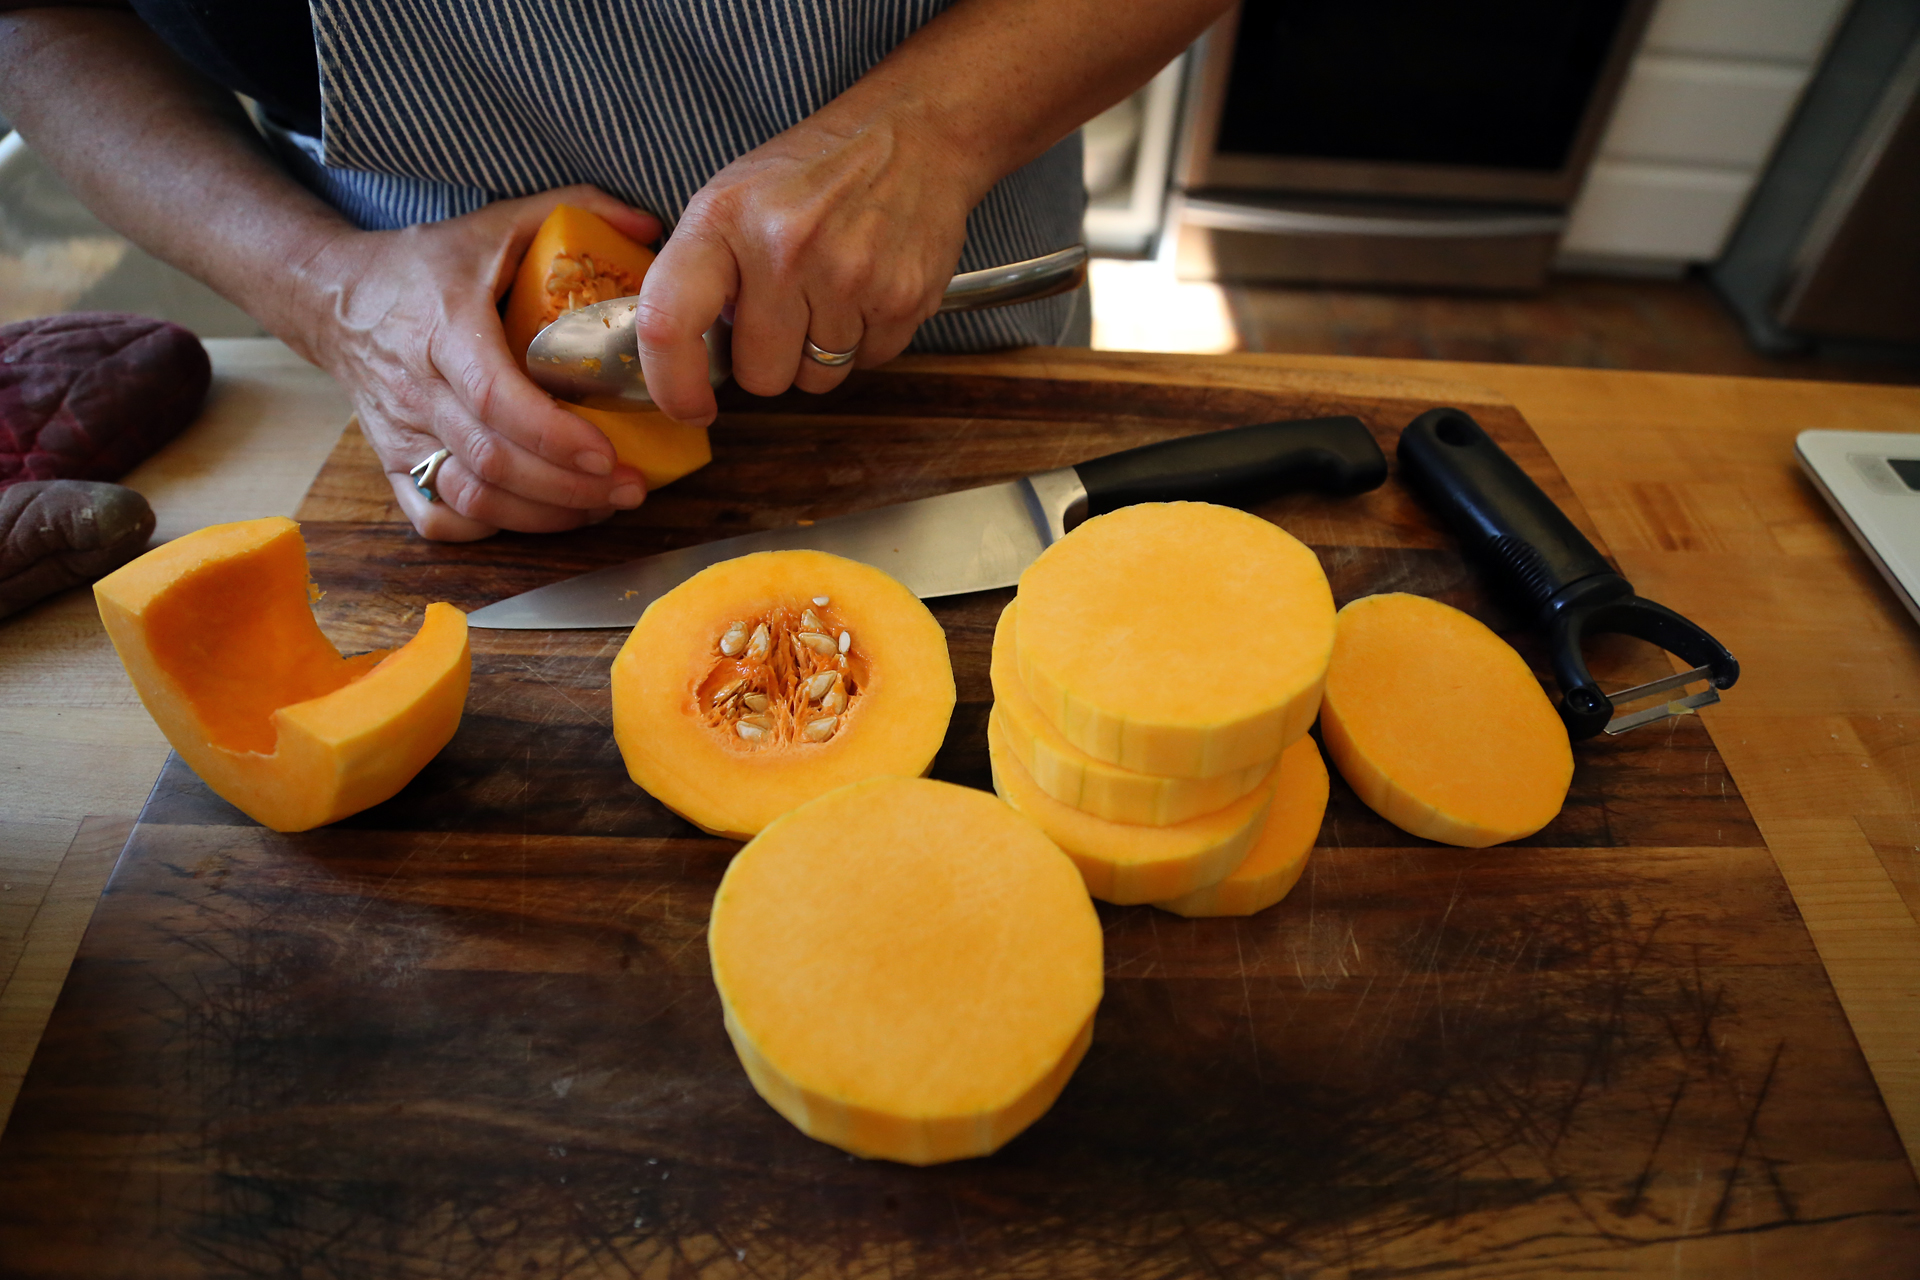 Slice the squash horizontally and scoop out the seeds. 